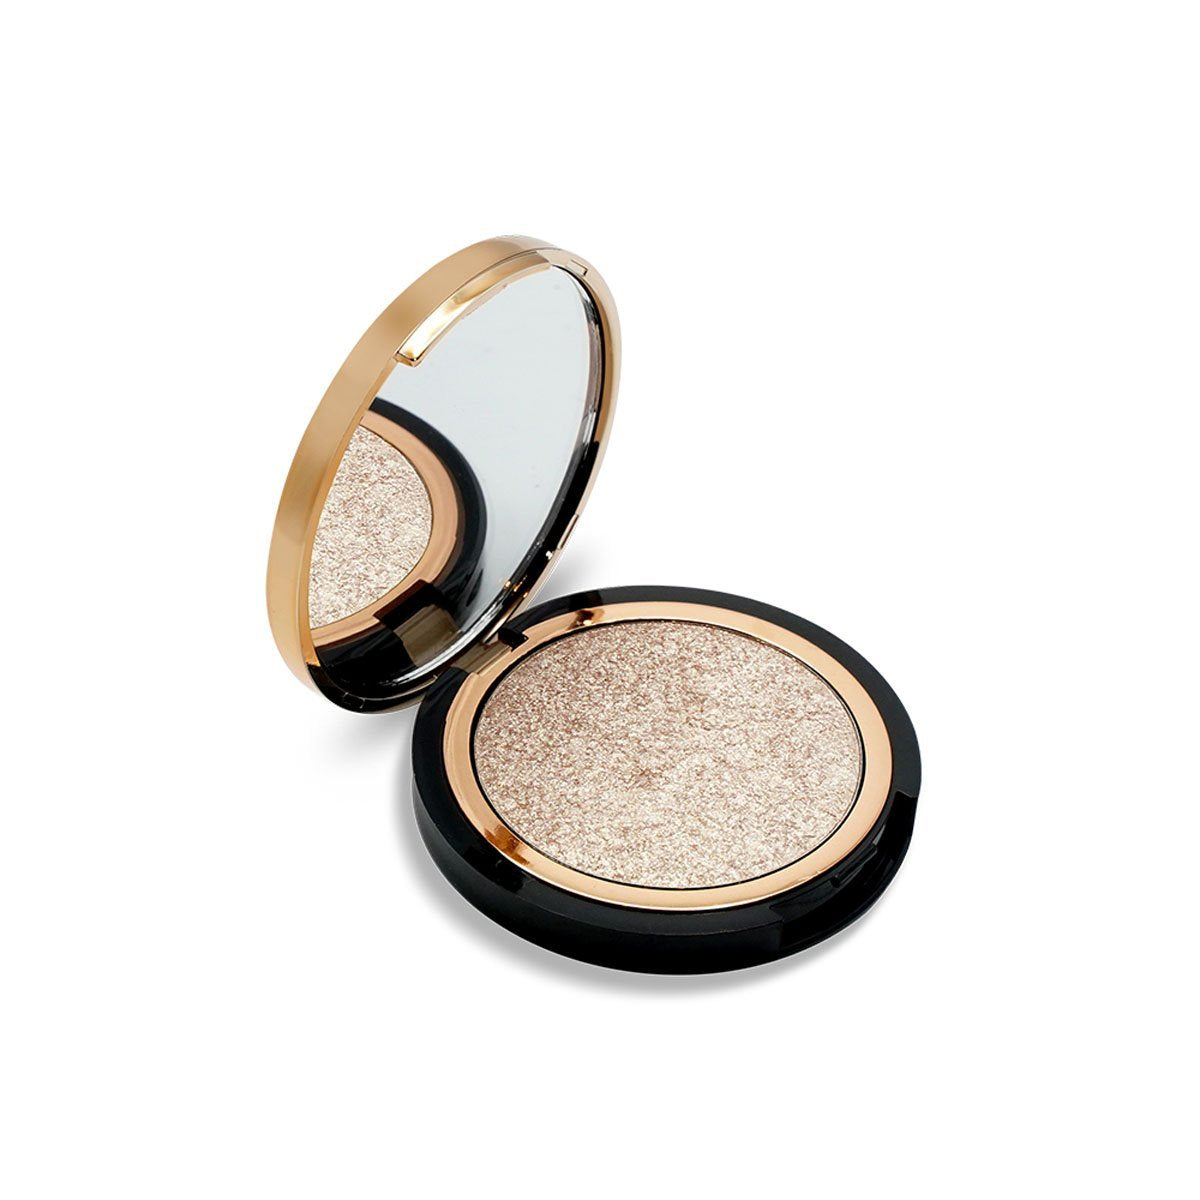 ST London - 3D Lights Eye Shadow - Gold Mine freeshipping - thehimherstore